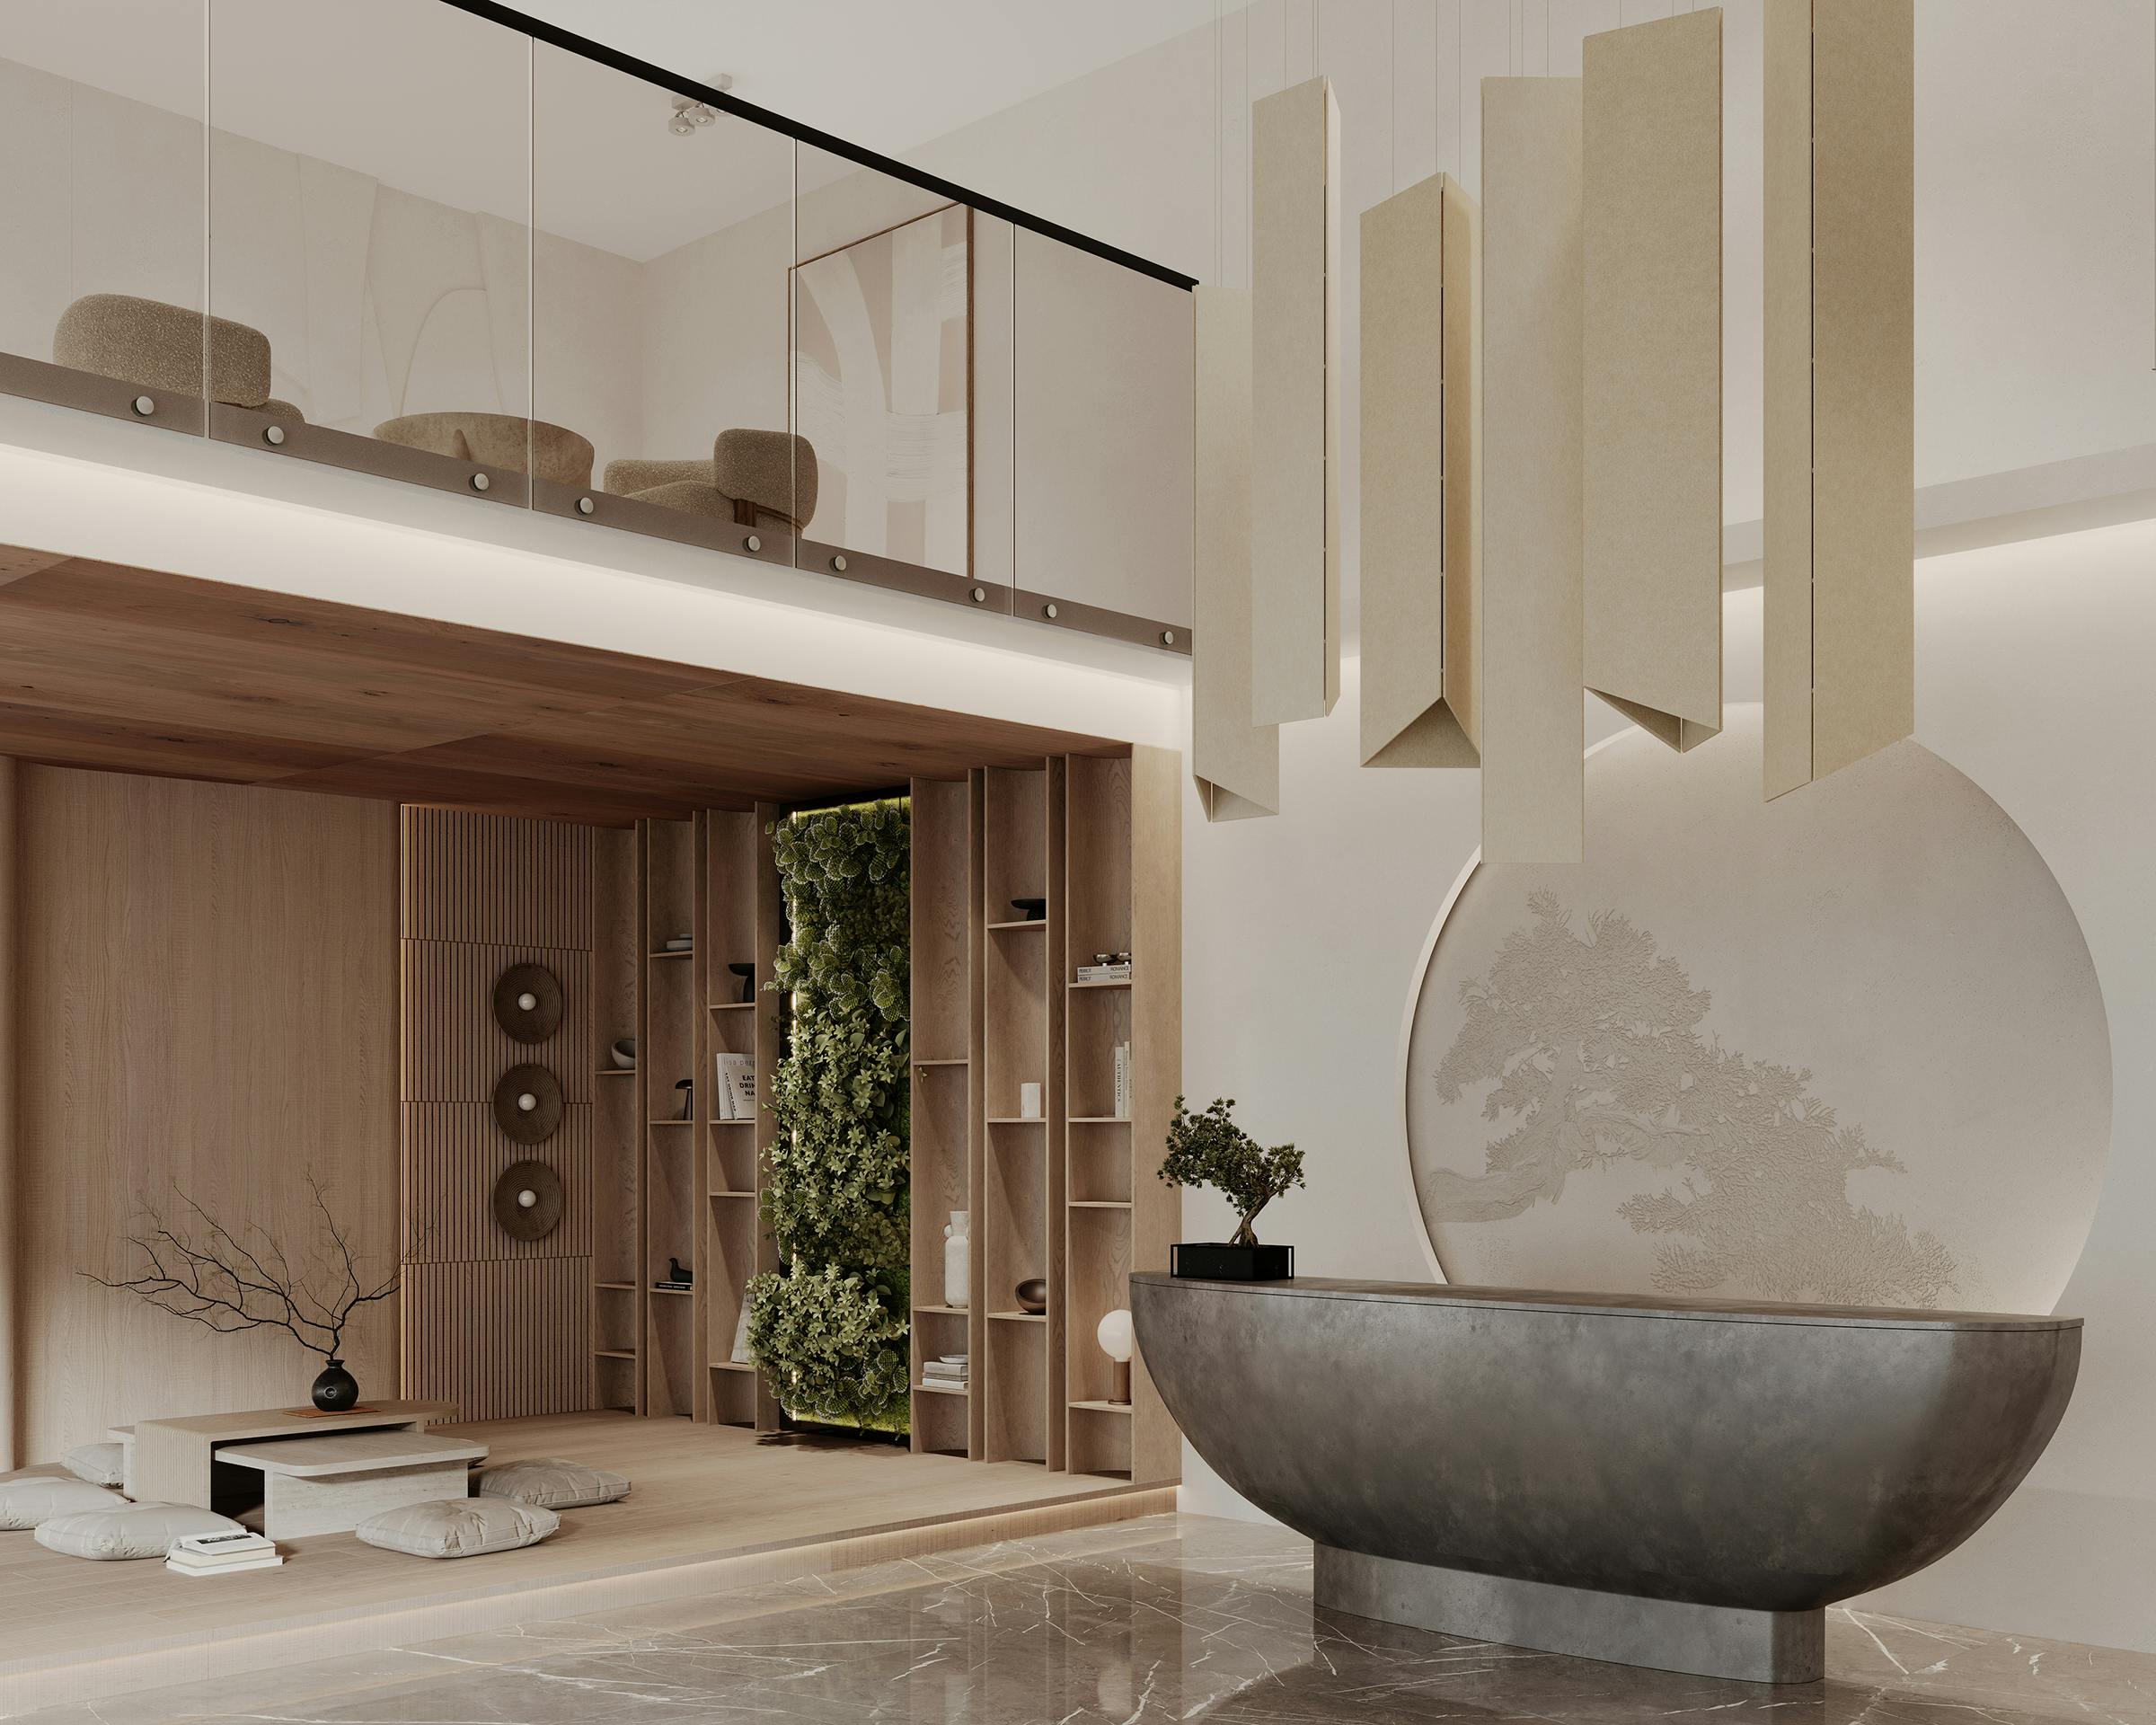 Modern zen-inspired bathroom with a large, round stone bathtub as the centerpiece, surrounded by wooden elements, greenery walls, and hanging geometric pendant clouds, creating a serene and naturalistic space.